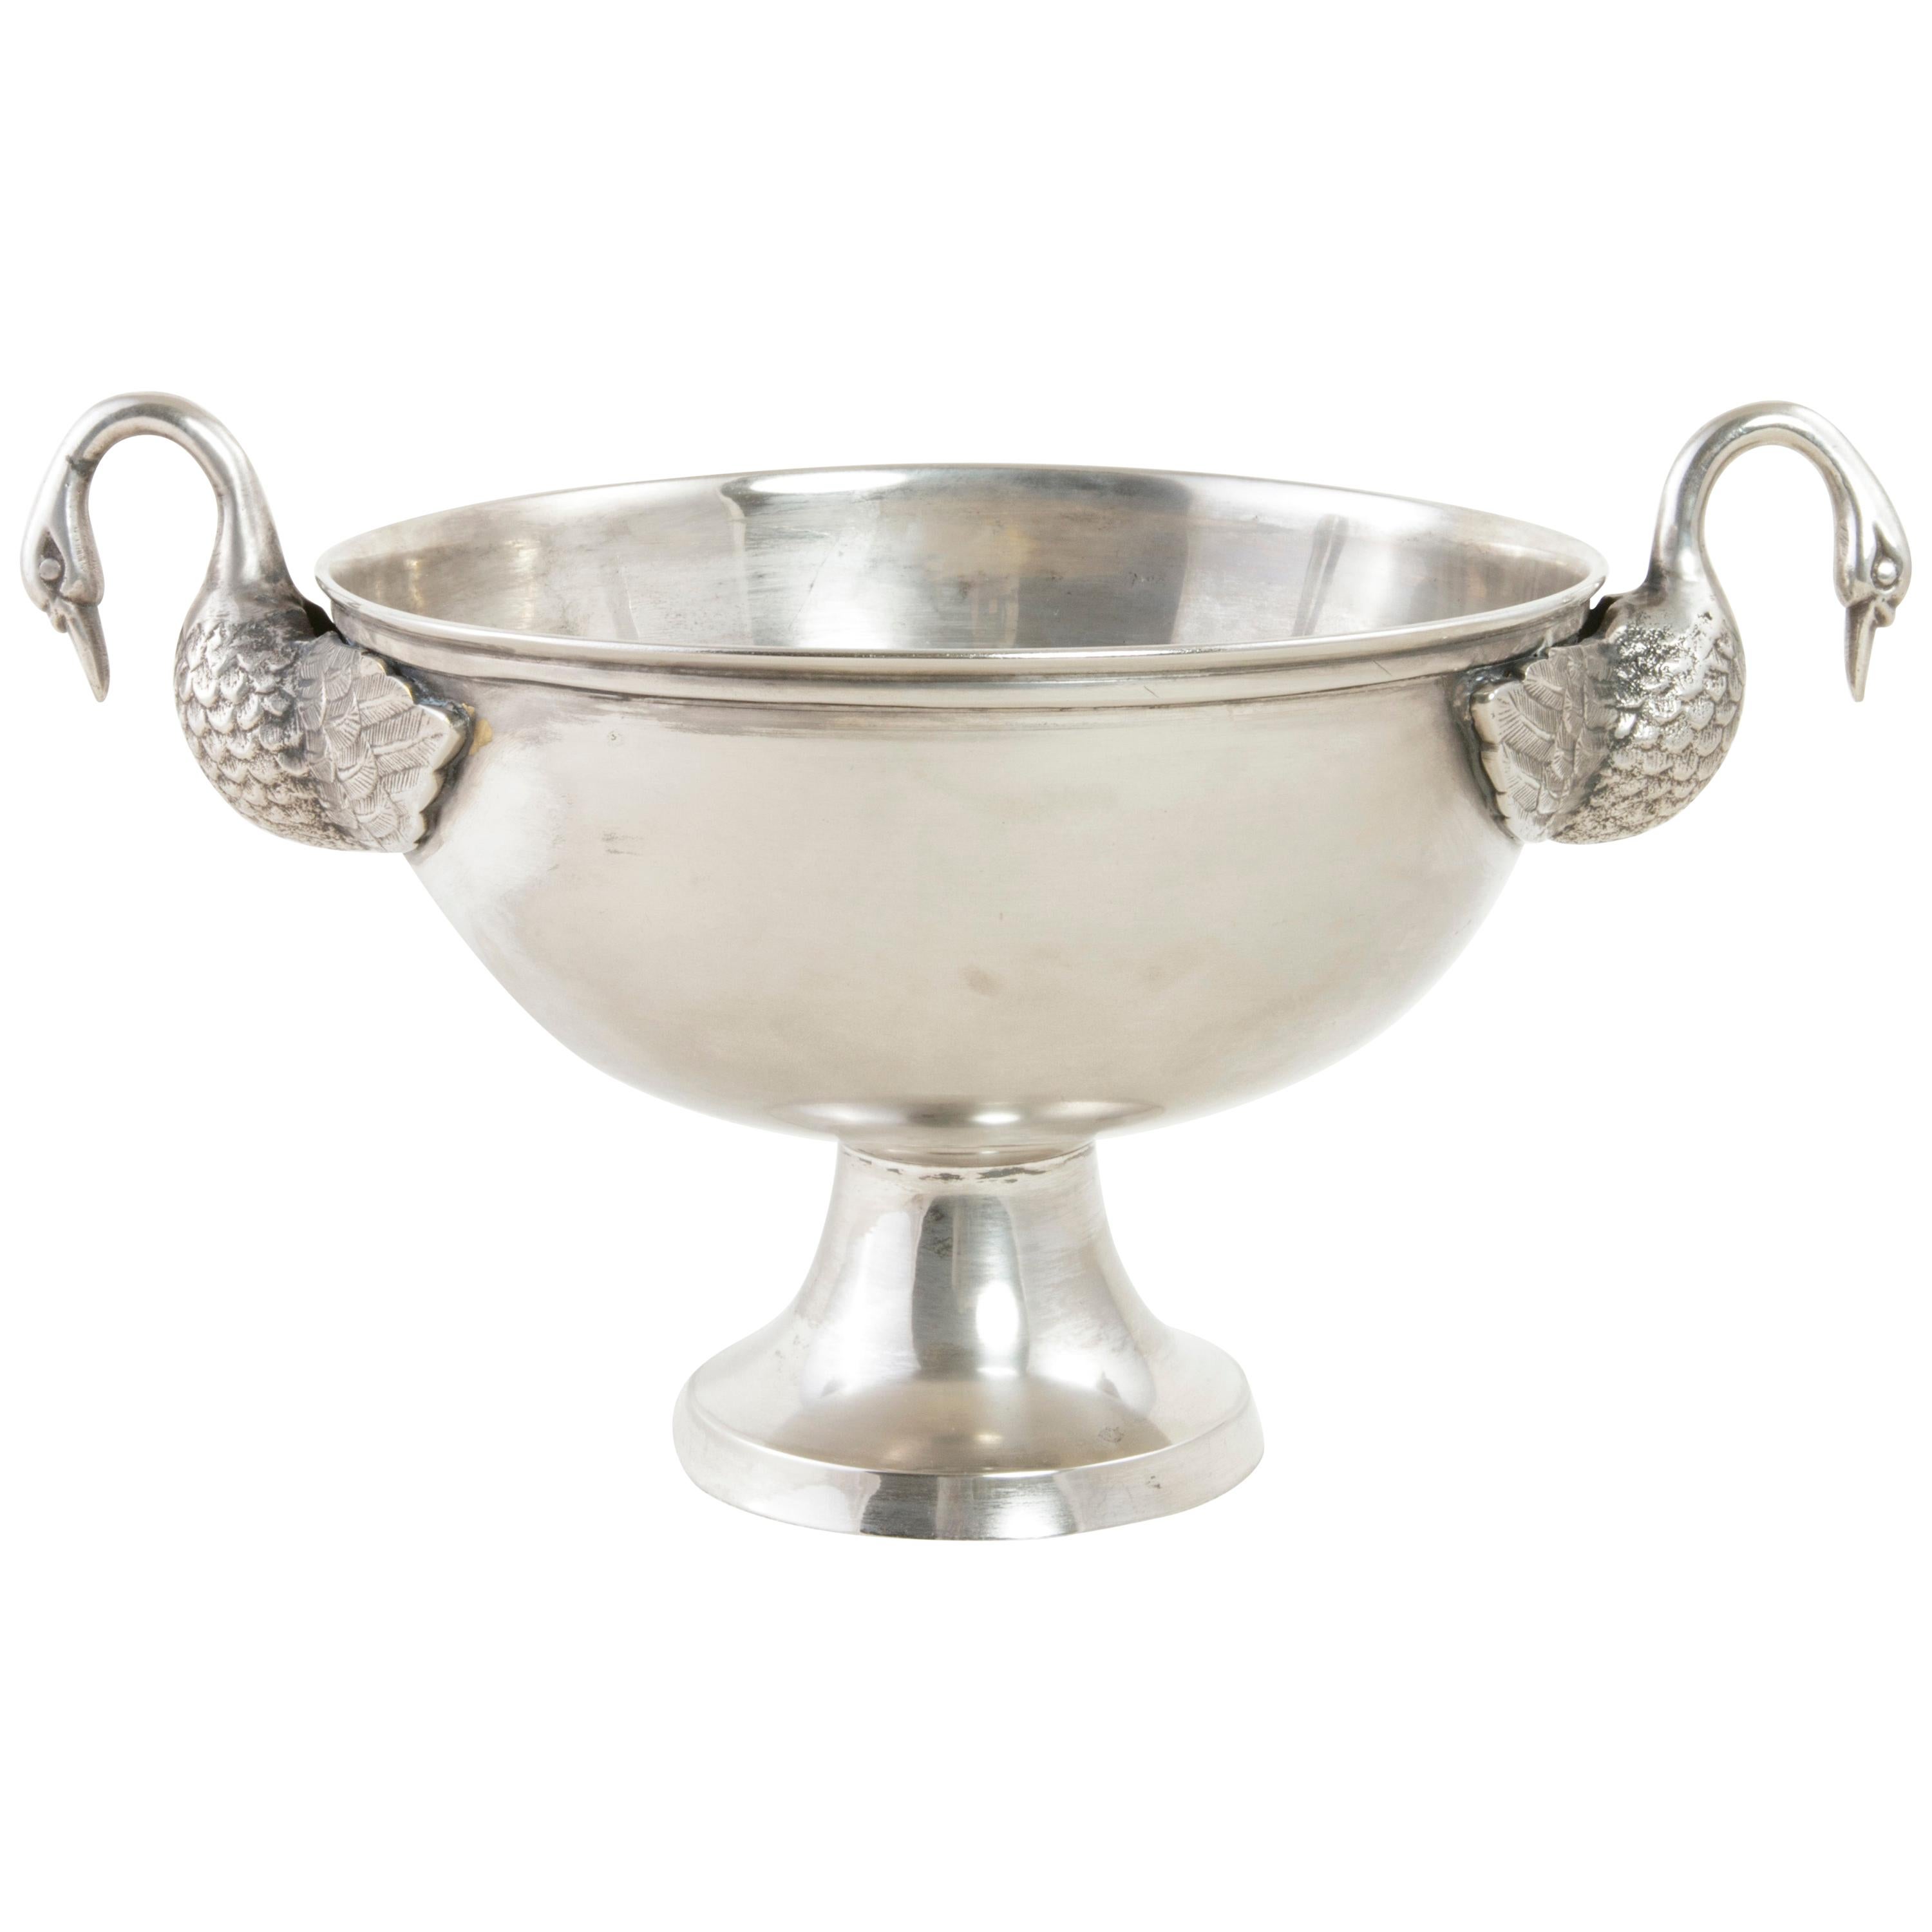 Late 19th Century French Restauration Style Silver Plate Ice Bucket with Swans